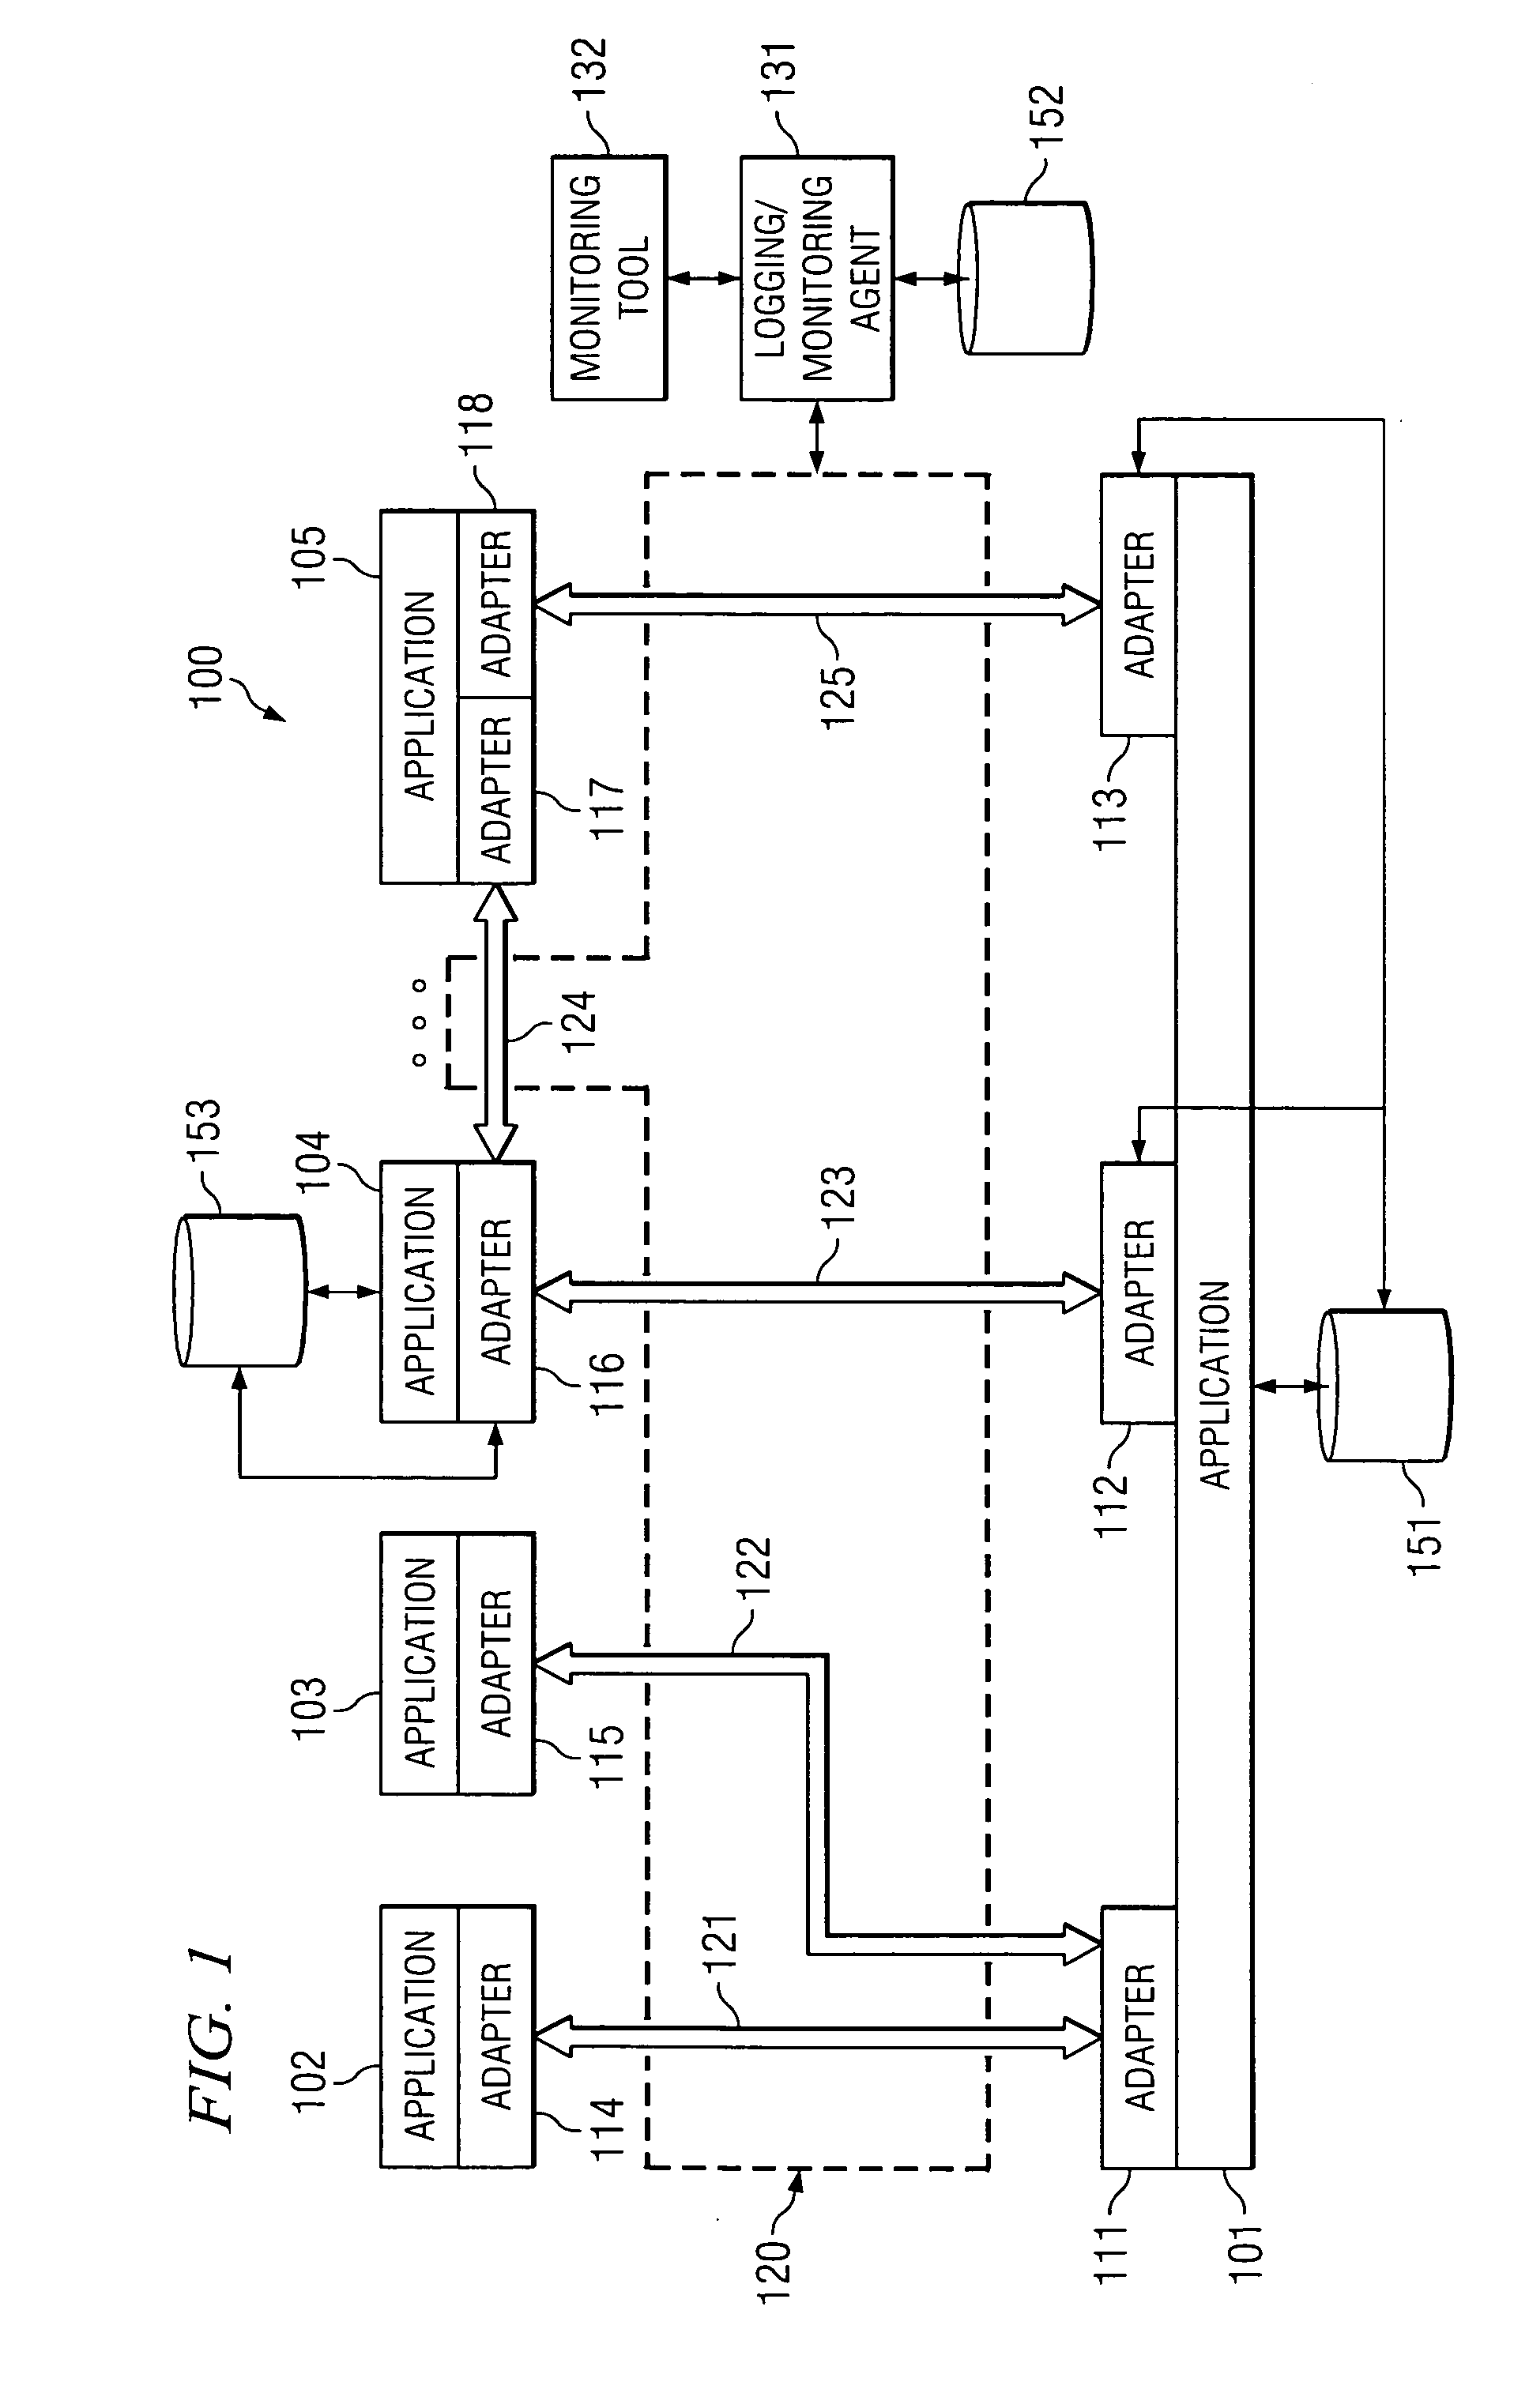 Systems and methods providing intelligent routing of data between software systems